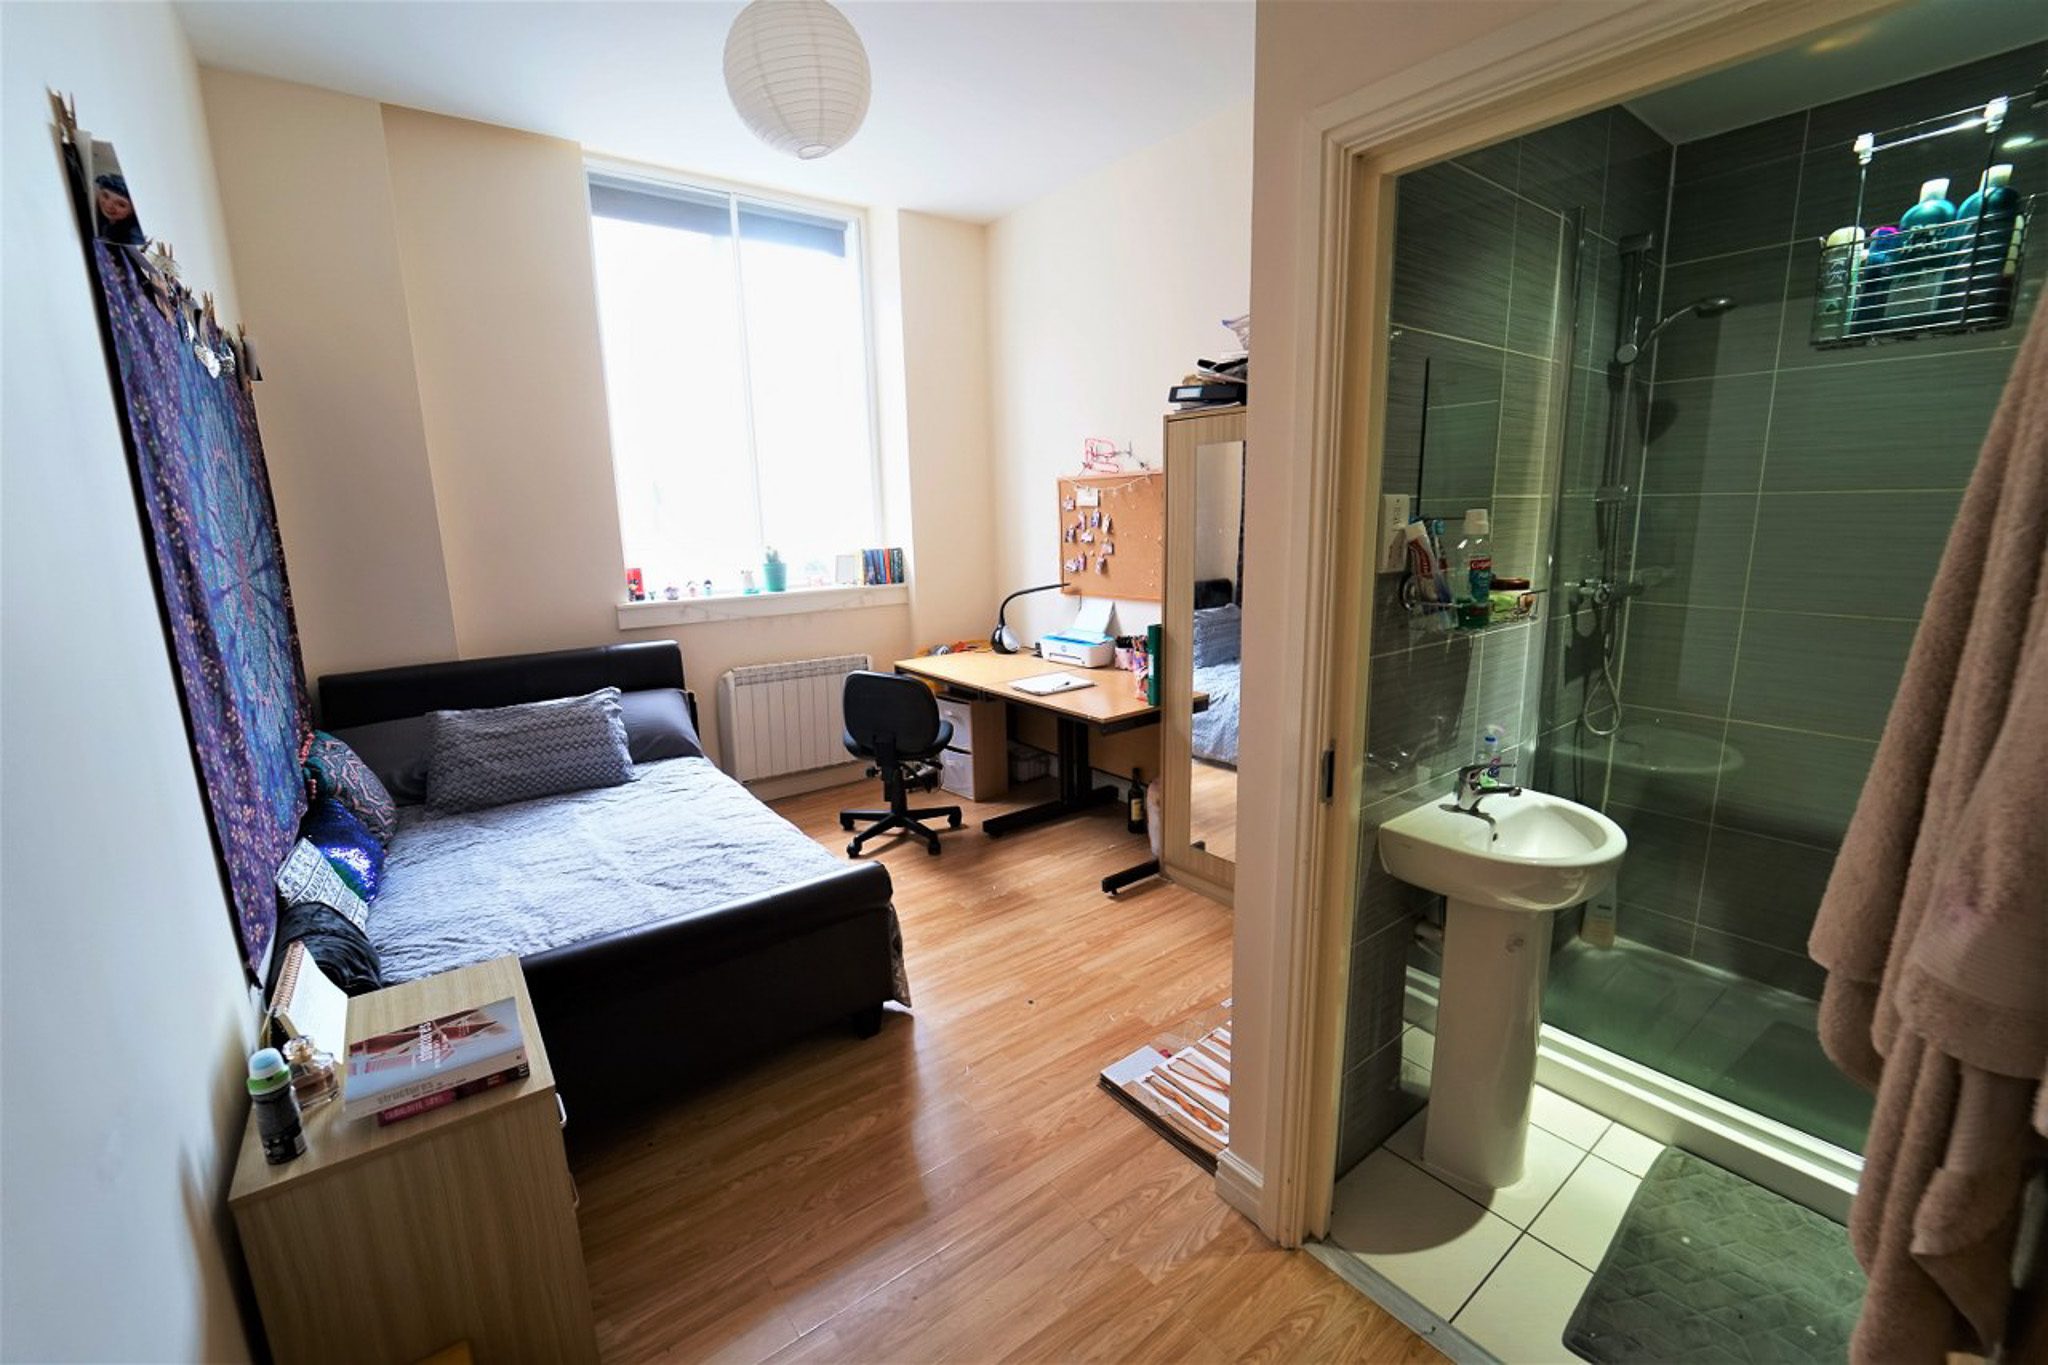 Silver Ensuite | 4 or 6 Bed Flat Image